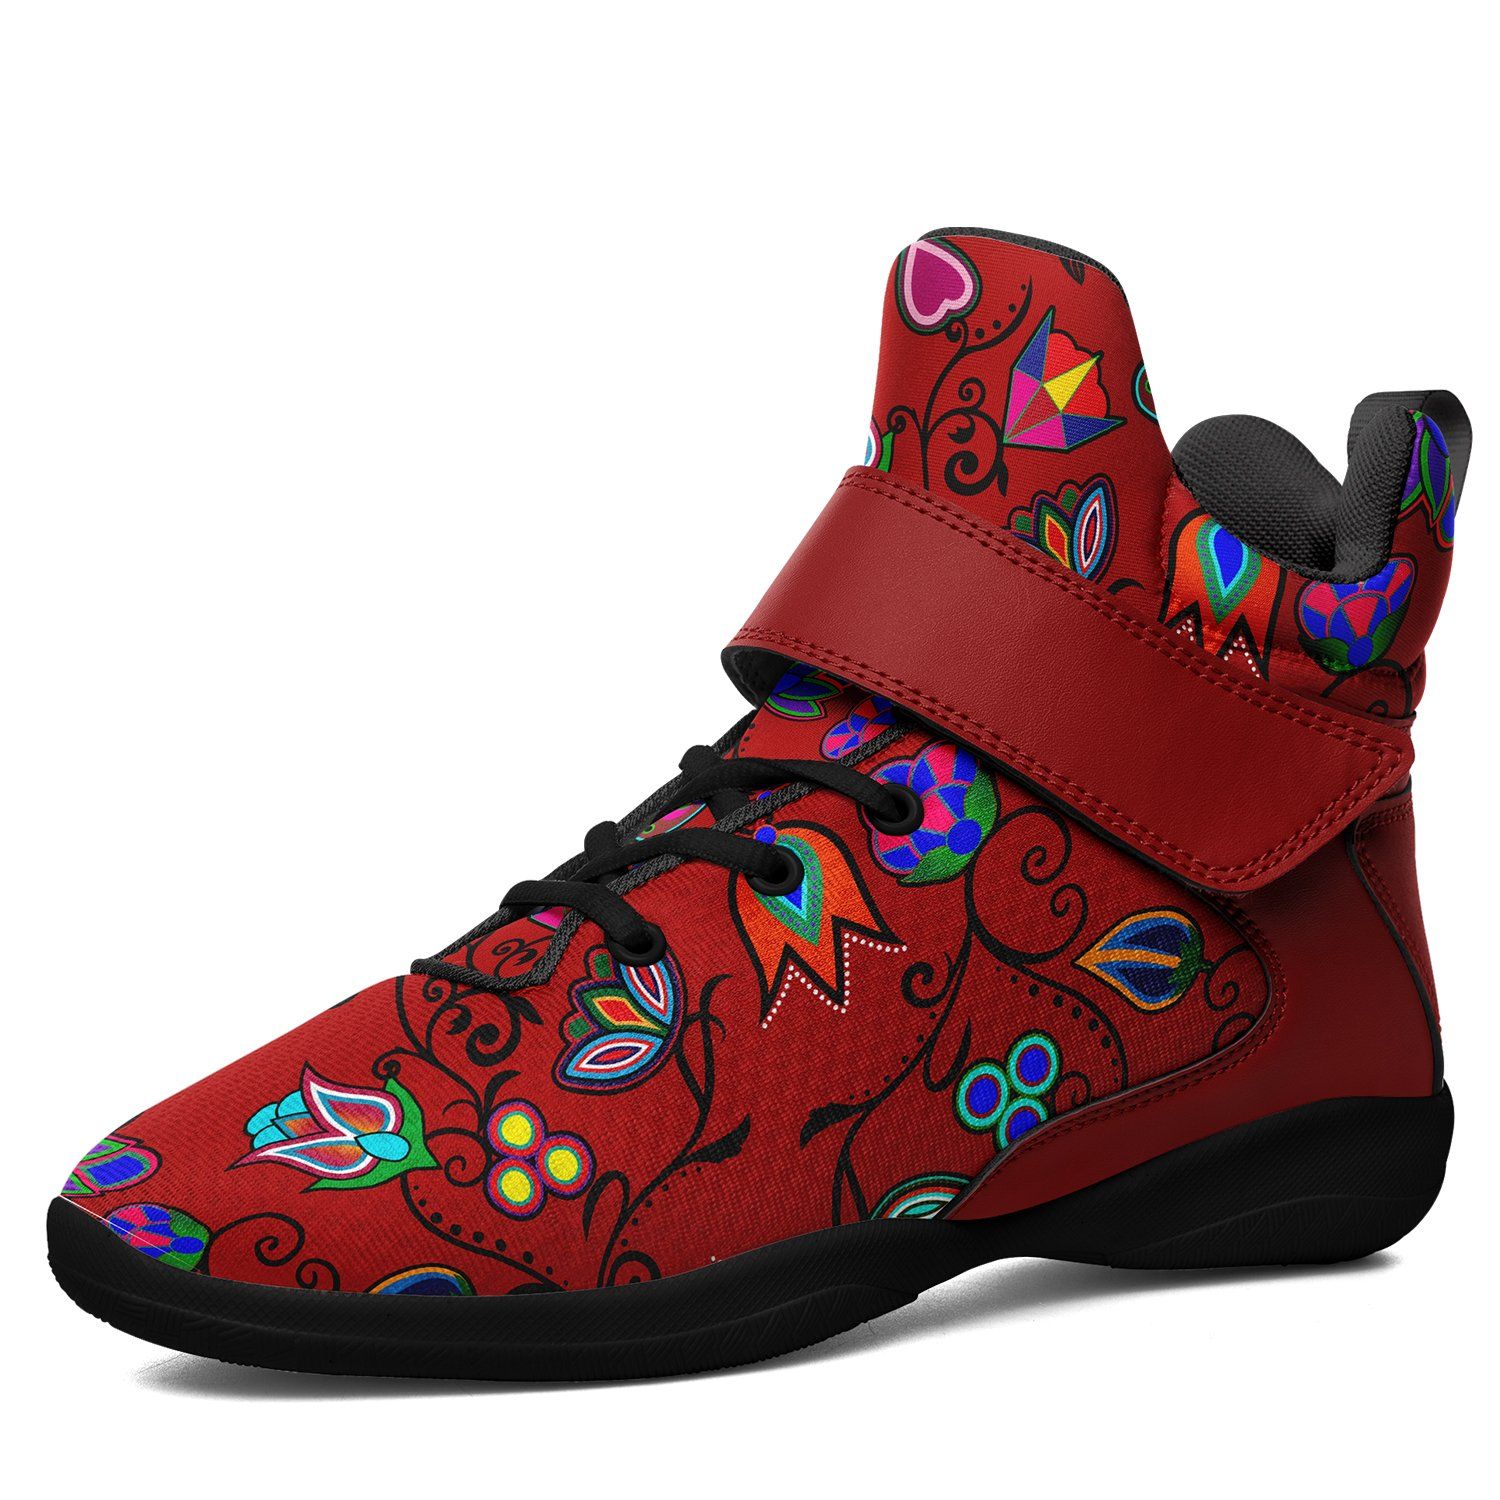 Indigenous Paisley Dahlia Ipottaa Basketball / Sport High Top Shoes 49 Dzine US Women 4.5 / US Youth 3.5 / EUR 35 Black Sole with Dark Red Strap 